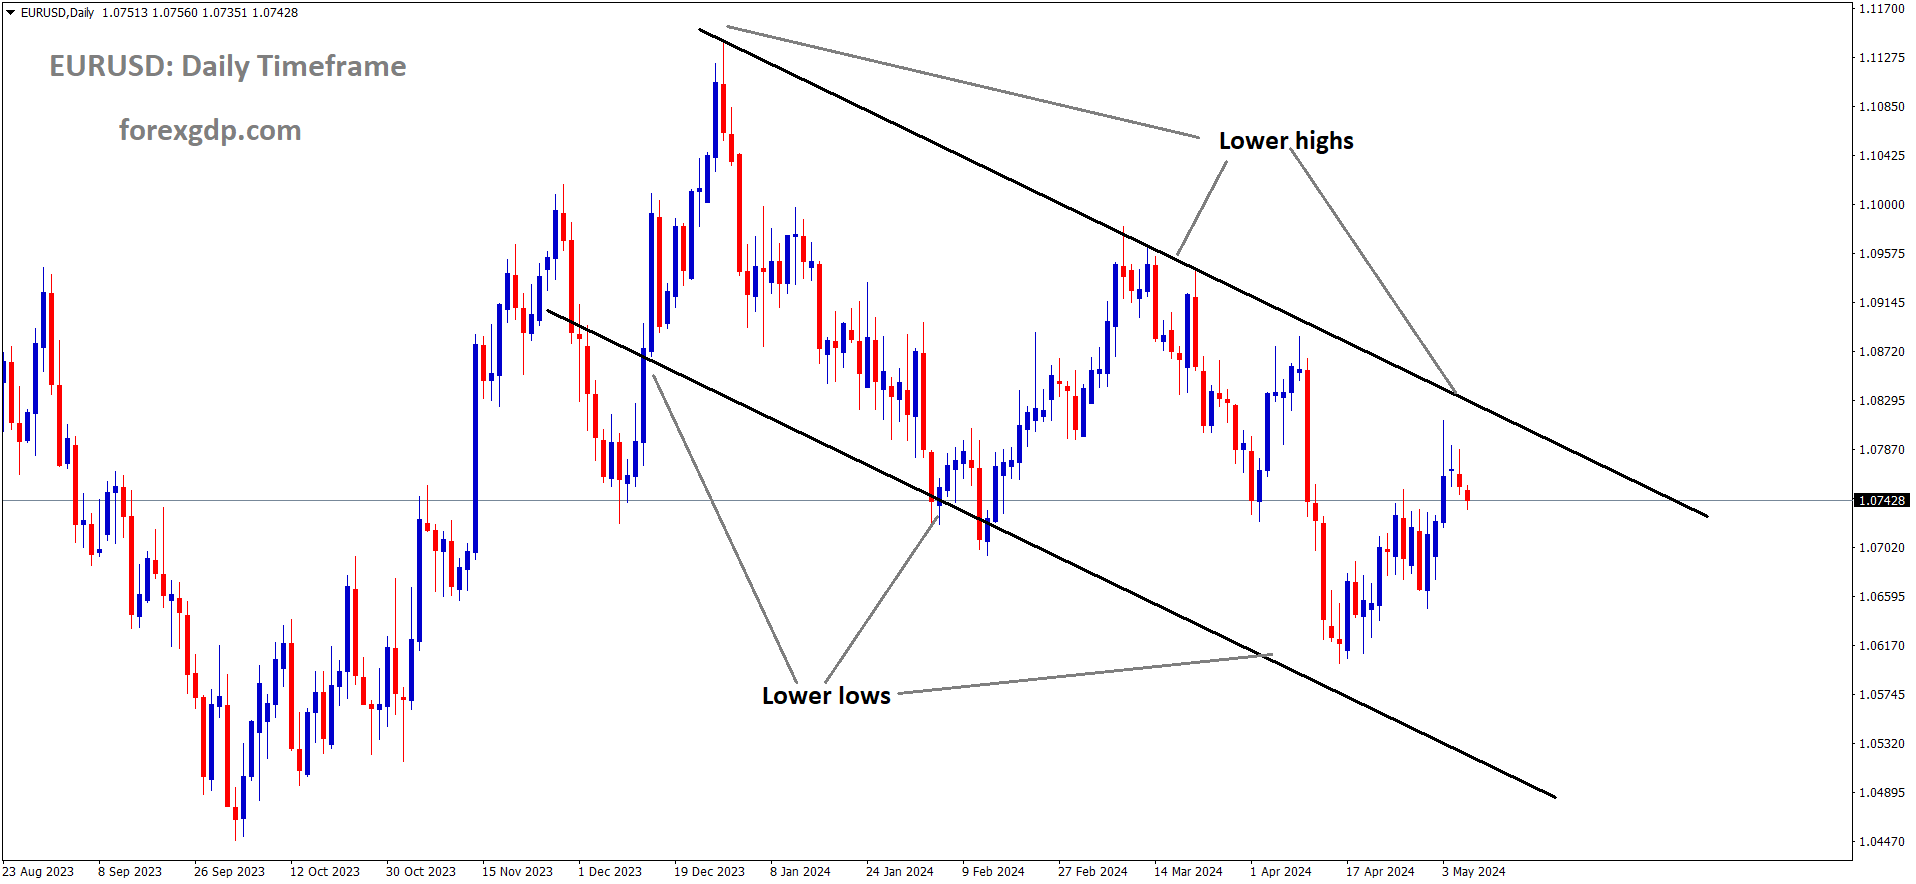 EURUSD is moving in the Descending channel and the market has fallen from the lower high area of the channel